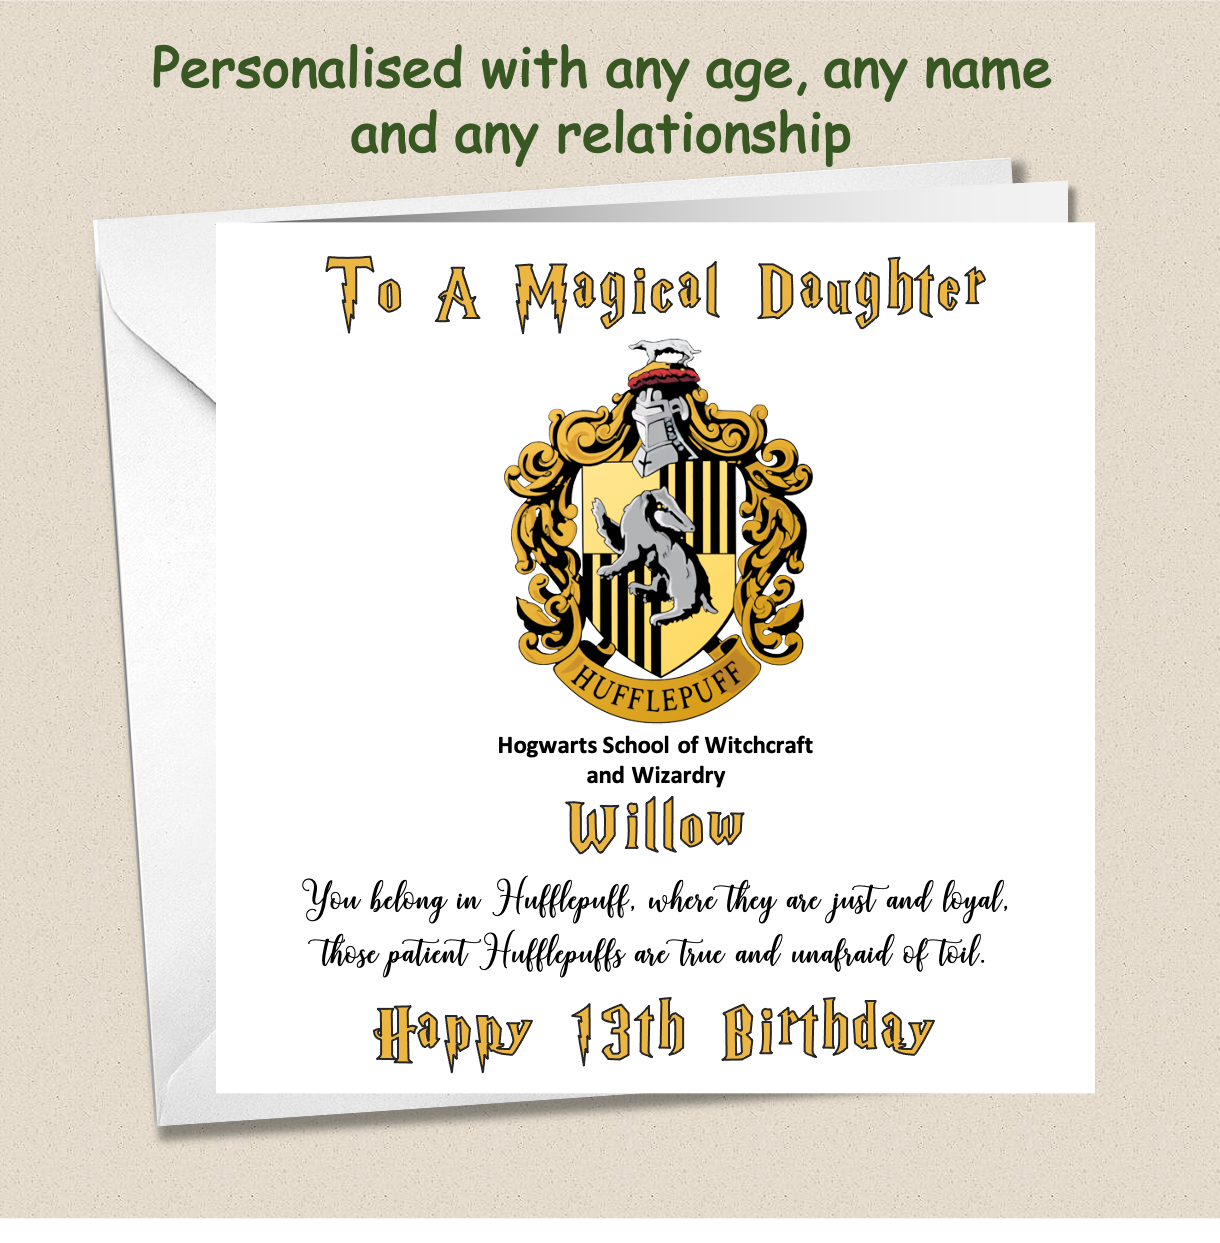 Personalised Hufflepuff (Harry Potter Inspired) Birthday Card Teenager